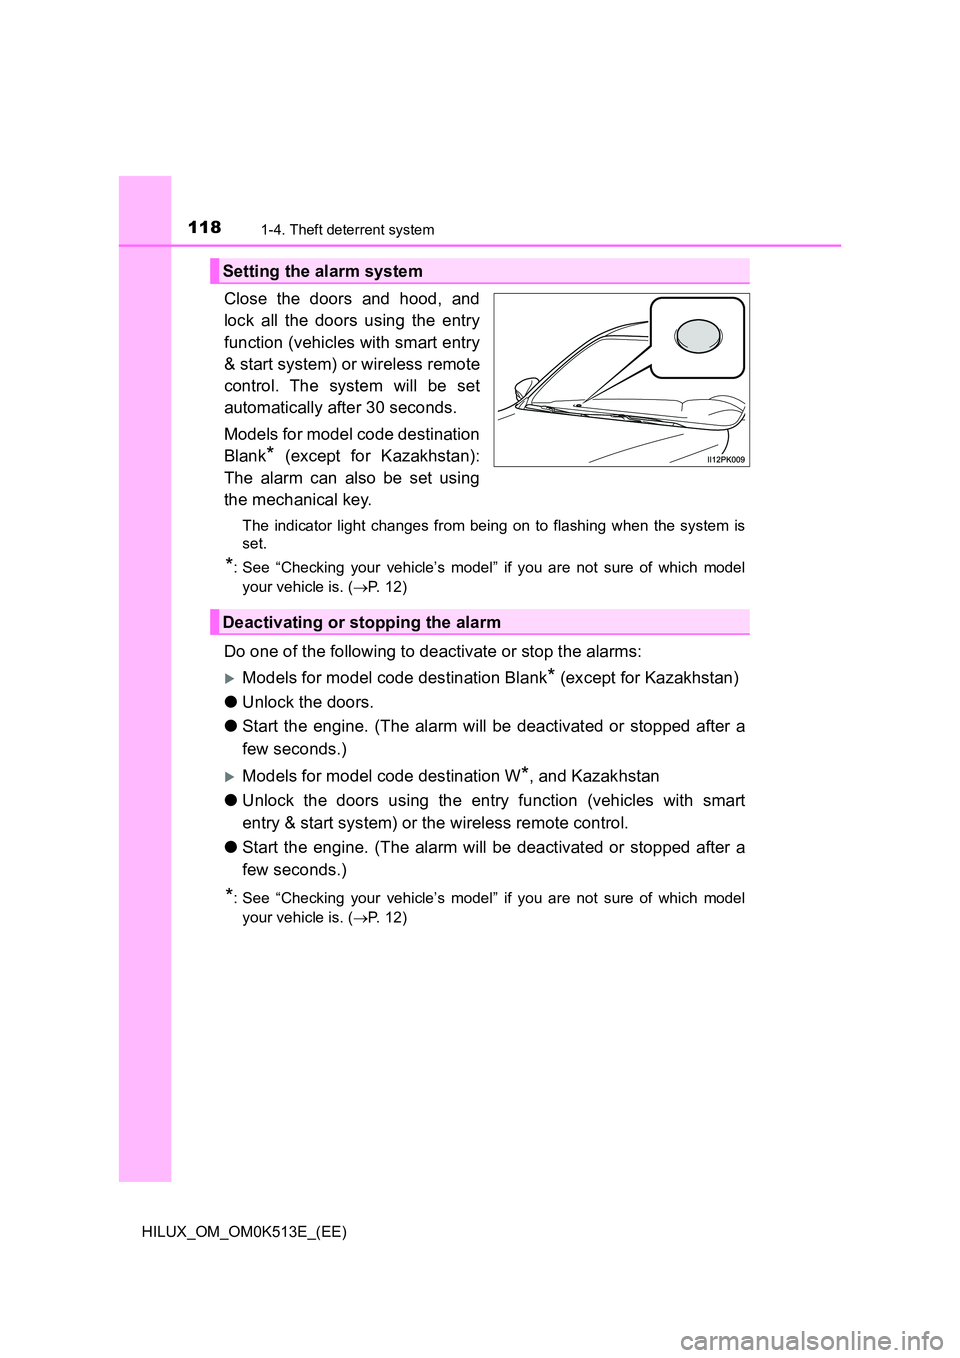 TOYOTA HILUX 2021  Owners Manual (in English) 1181-4. Theft deterrent system
HILUX_OM_OM0K513E_(EE)
Close the doors and hood, and 
lock all the doors using the entry 
function (vehicles with smart entry 
& start system) or wireless remote 
contro